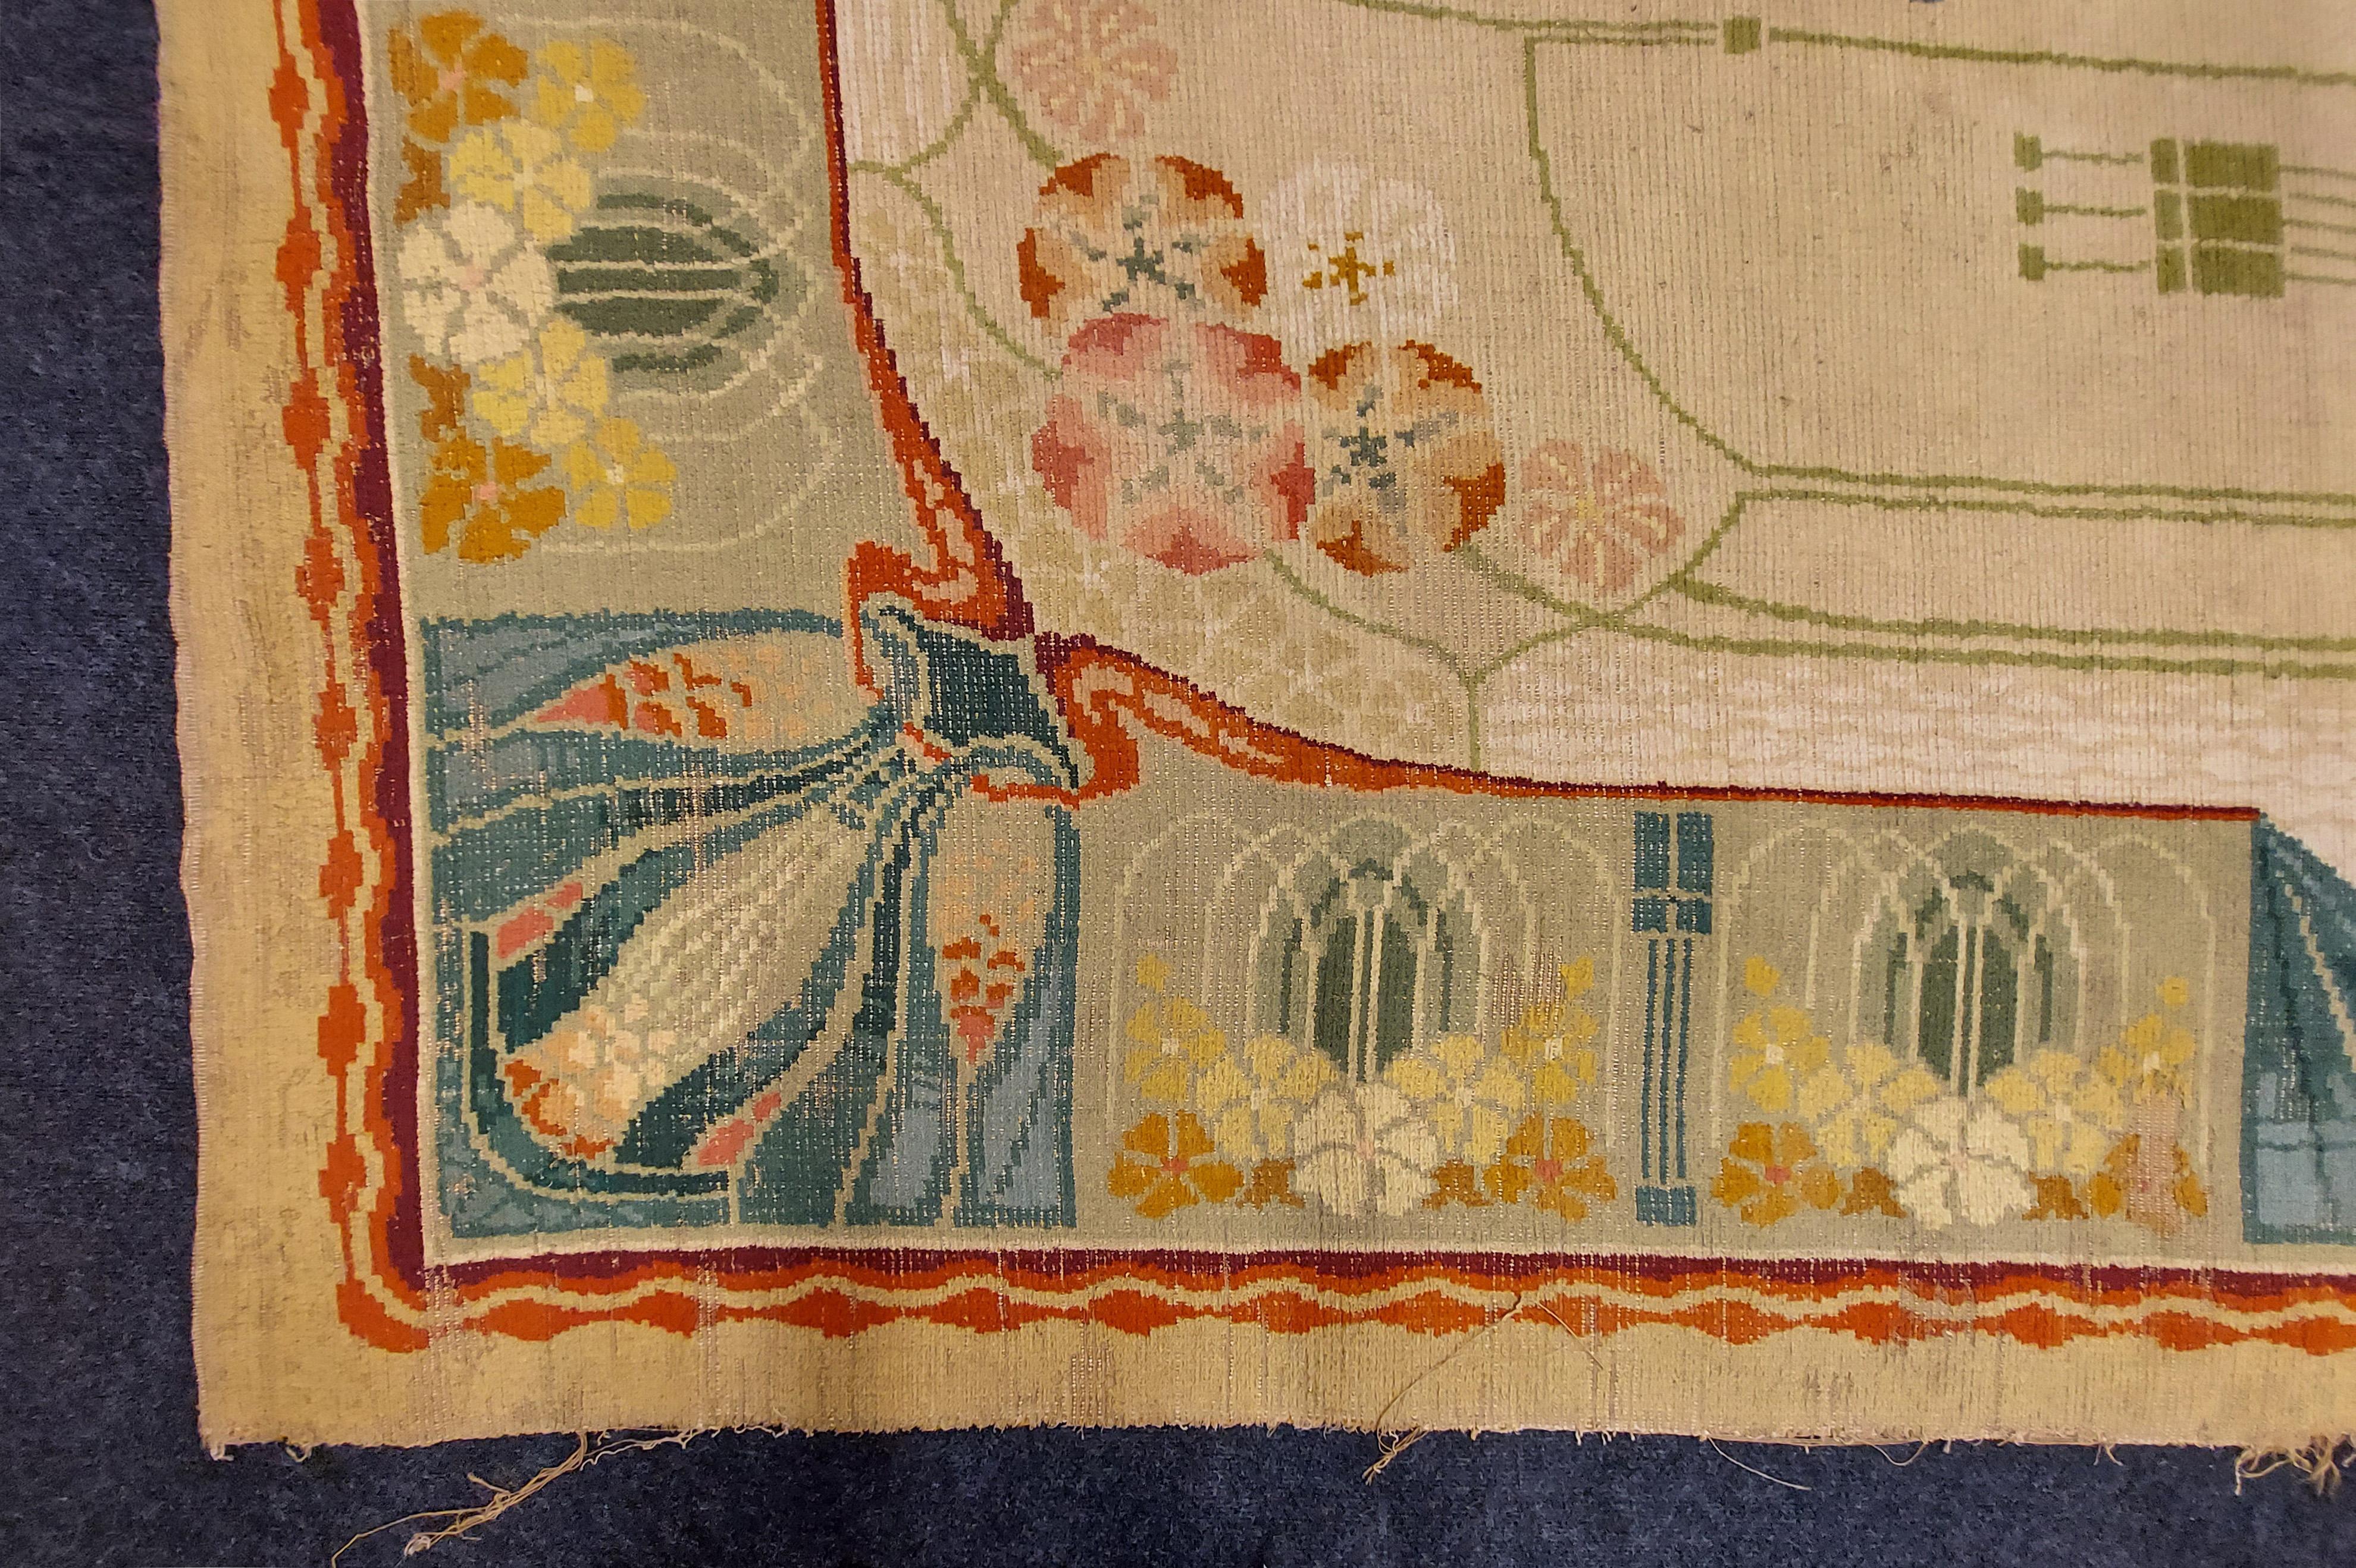 Hand-Woven European Art Nouveau Rug, Attributed to Designer Gustave Serrurier-Bovy  For Sale